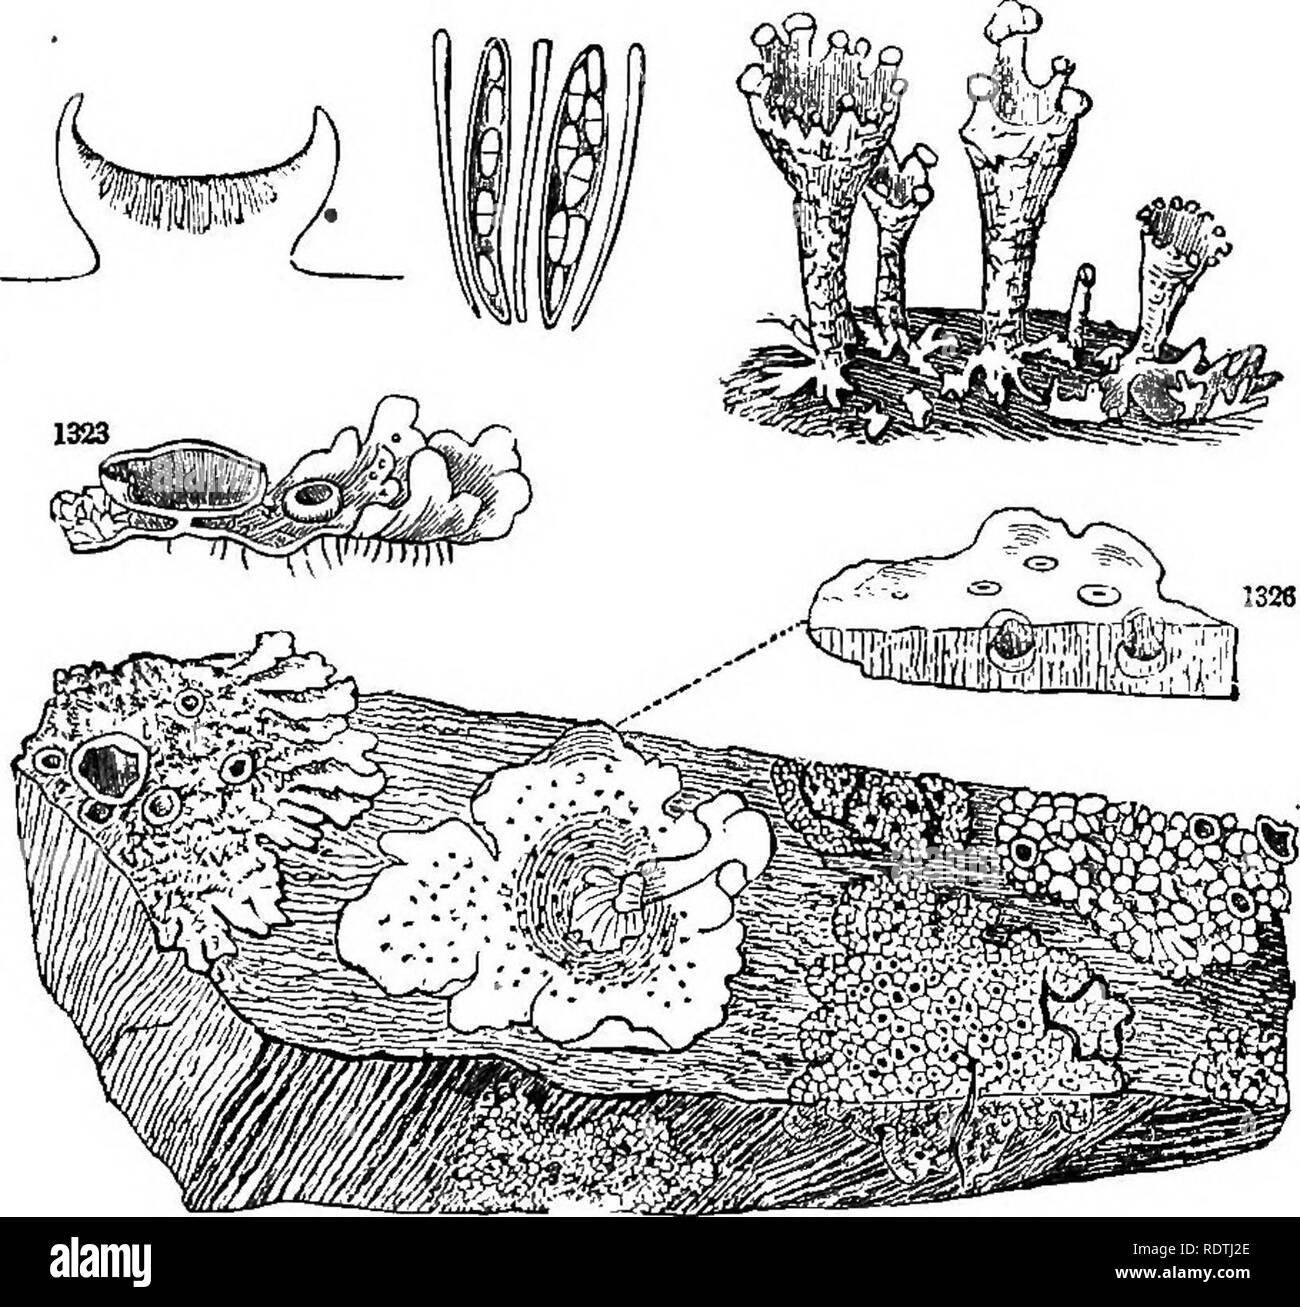 . Introduction to structural and systematic botany, and vegetable physiology. Botany. 506 ILLTJSTKATIONS OF THE NATURAL ORDERS. the upper they draw their nourishment directly from the air. The fructification is in cups, or shields (apotkecid),'resting on the surface of the thallus, or more or less immersed in its substance, or else in pulverulent spots scattered over the surface. A magnified section through an apothecium (Fig. 1324) brings to view a stratum of elongated sacs (asci), with filaments intermixed, as seen detached and highly magnified at Fig. 1325. Each asms, or sac, contains a few Stock Photo